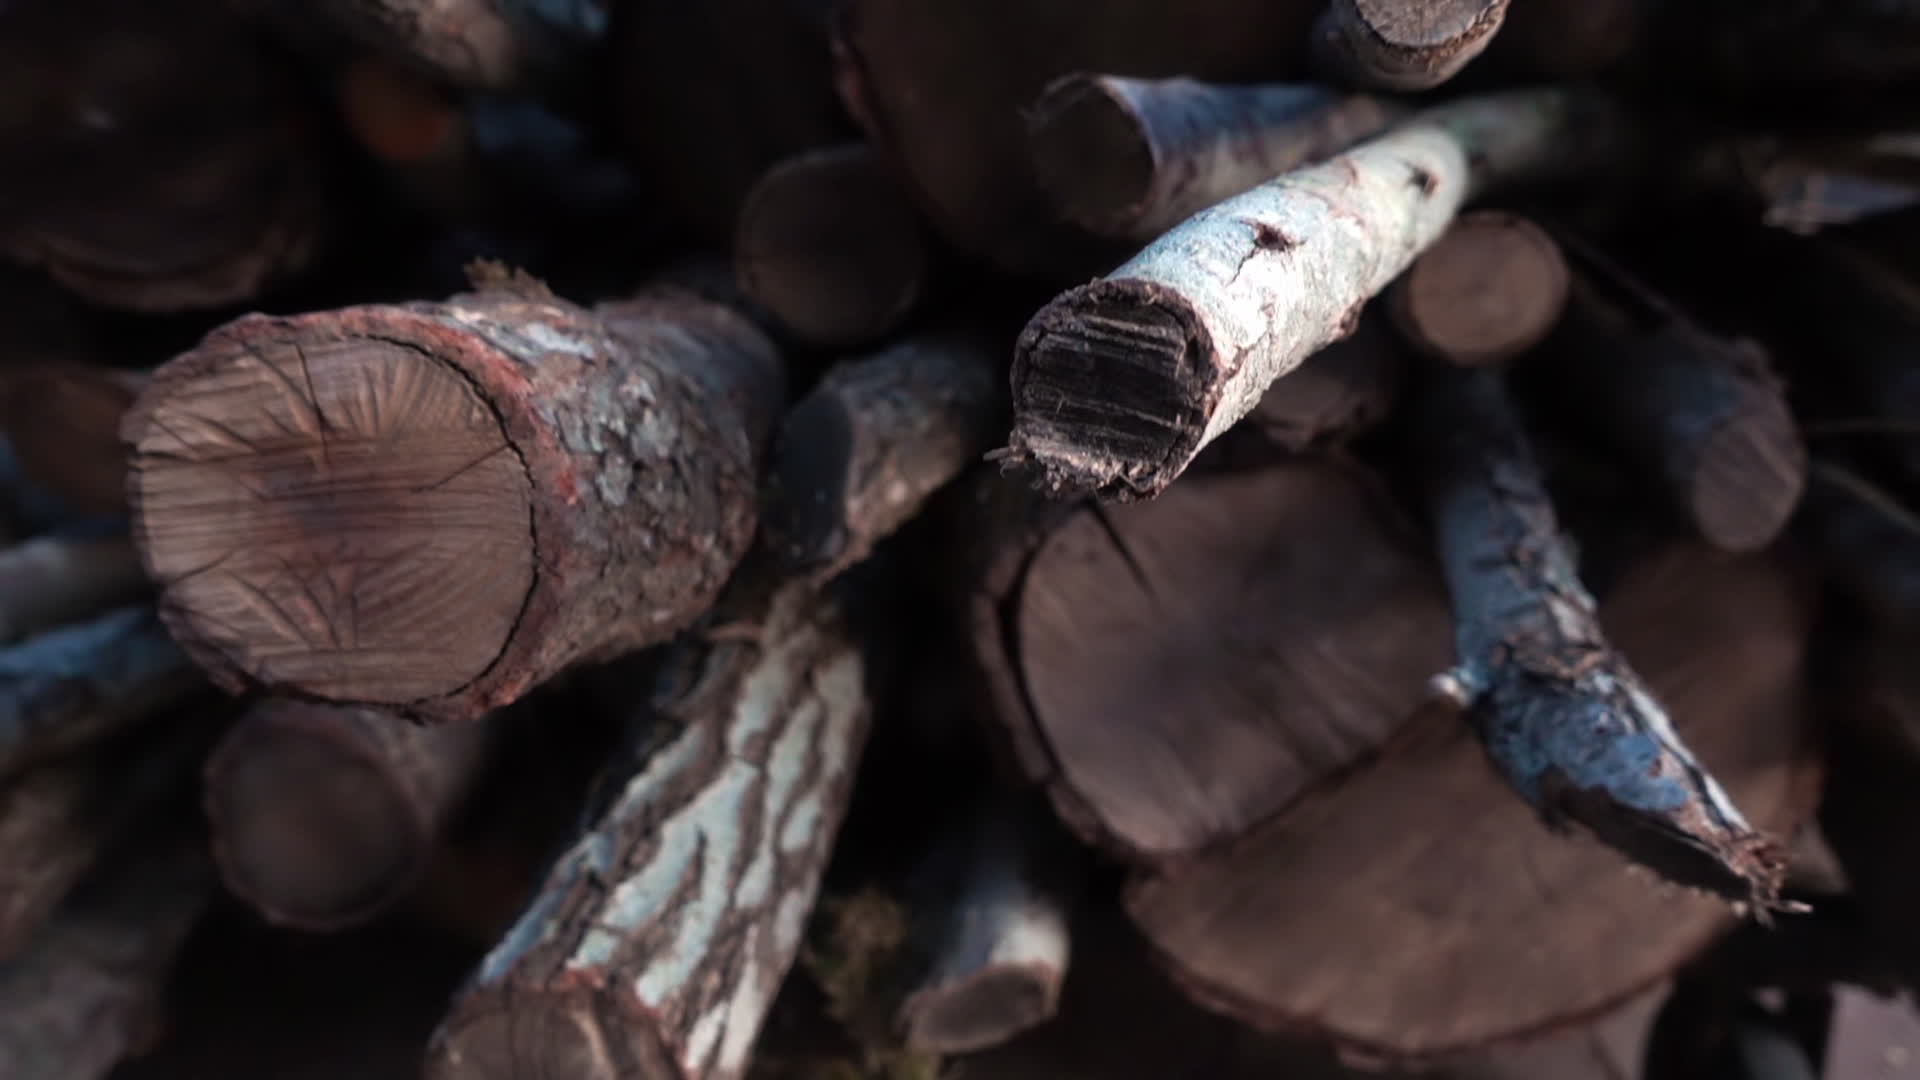 Free Stock Videos of Hardwood, Stock Footage in 4K and Full HD